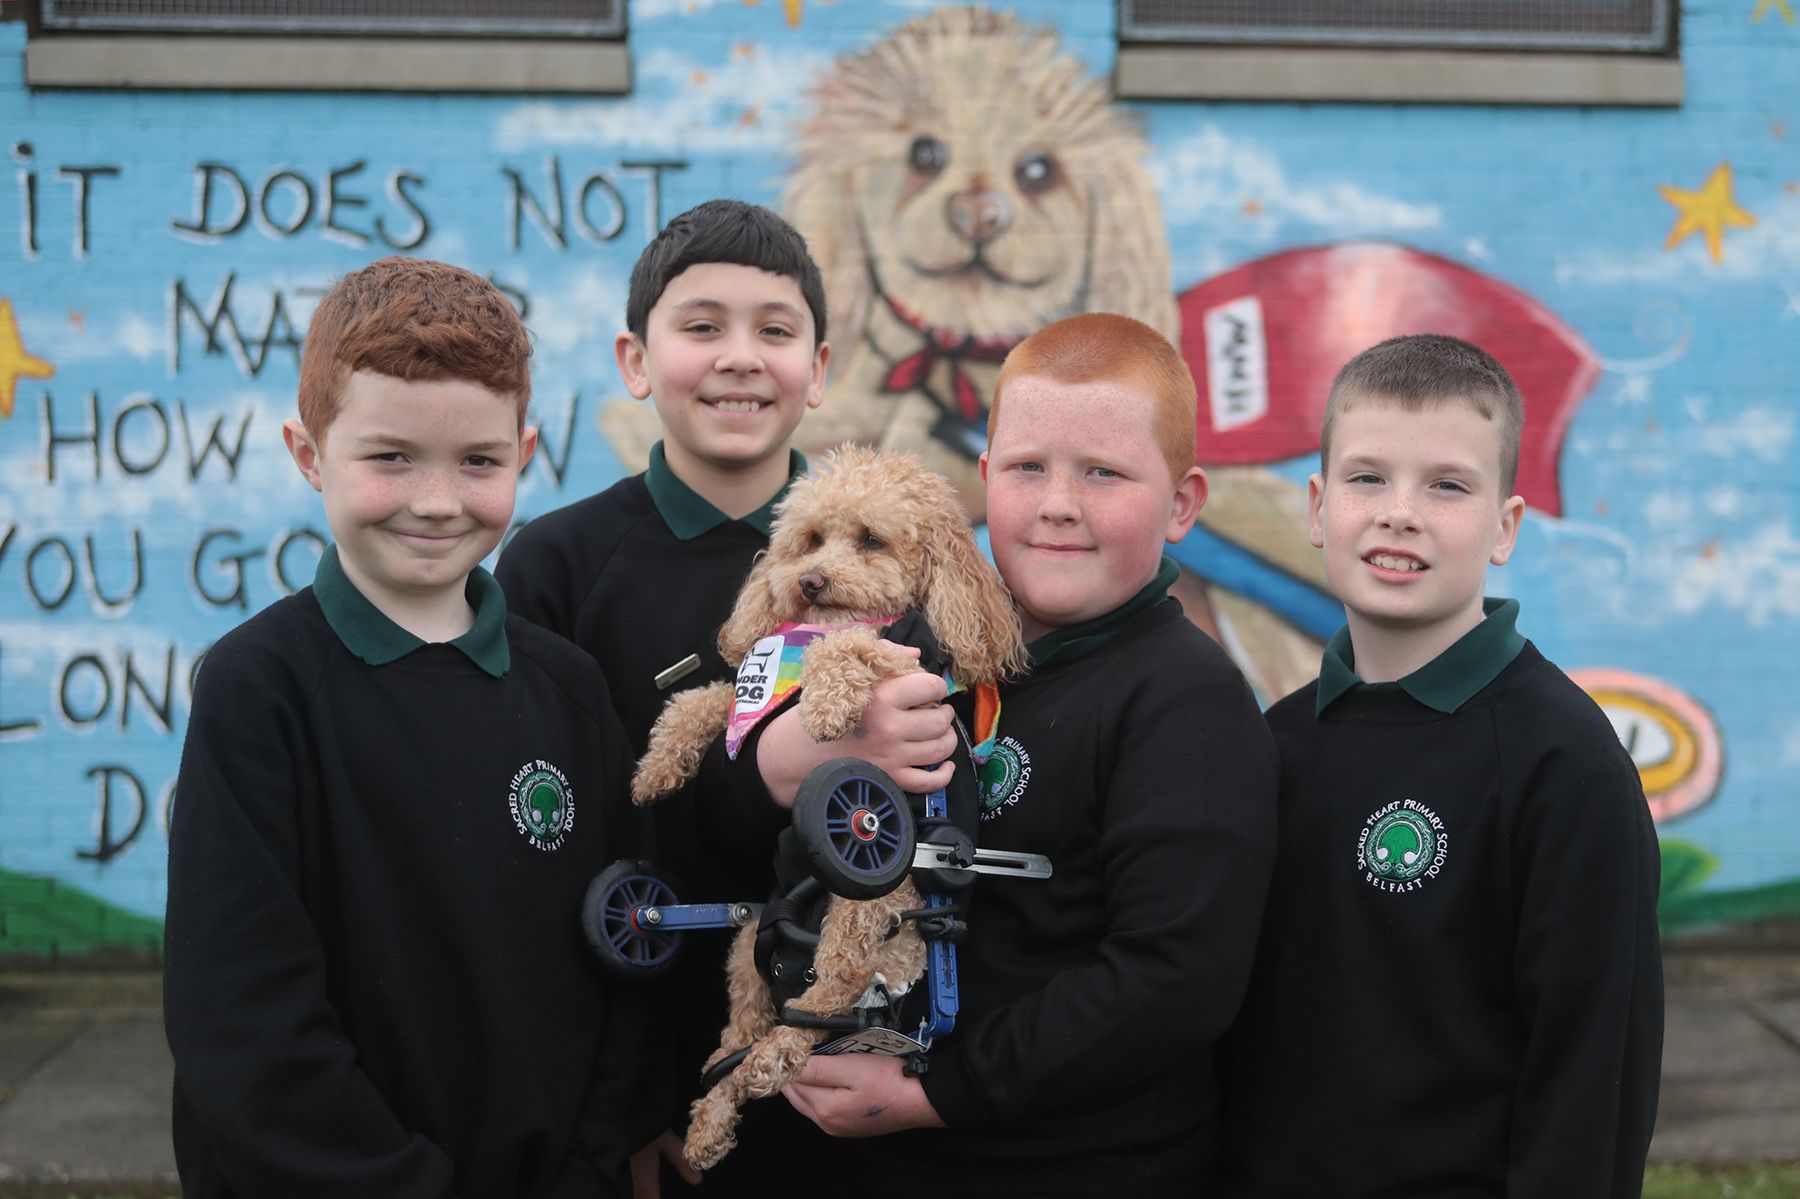 MUCH LOVED: Henry Wee Wheels with pupils from Sacred Heart Boys Primary School whom he visits every Thursday. Henry has become both a member of staff and a pupil at the school